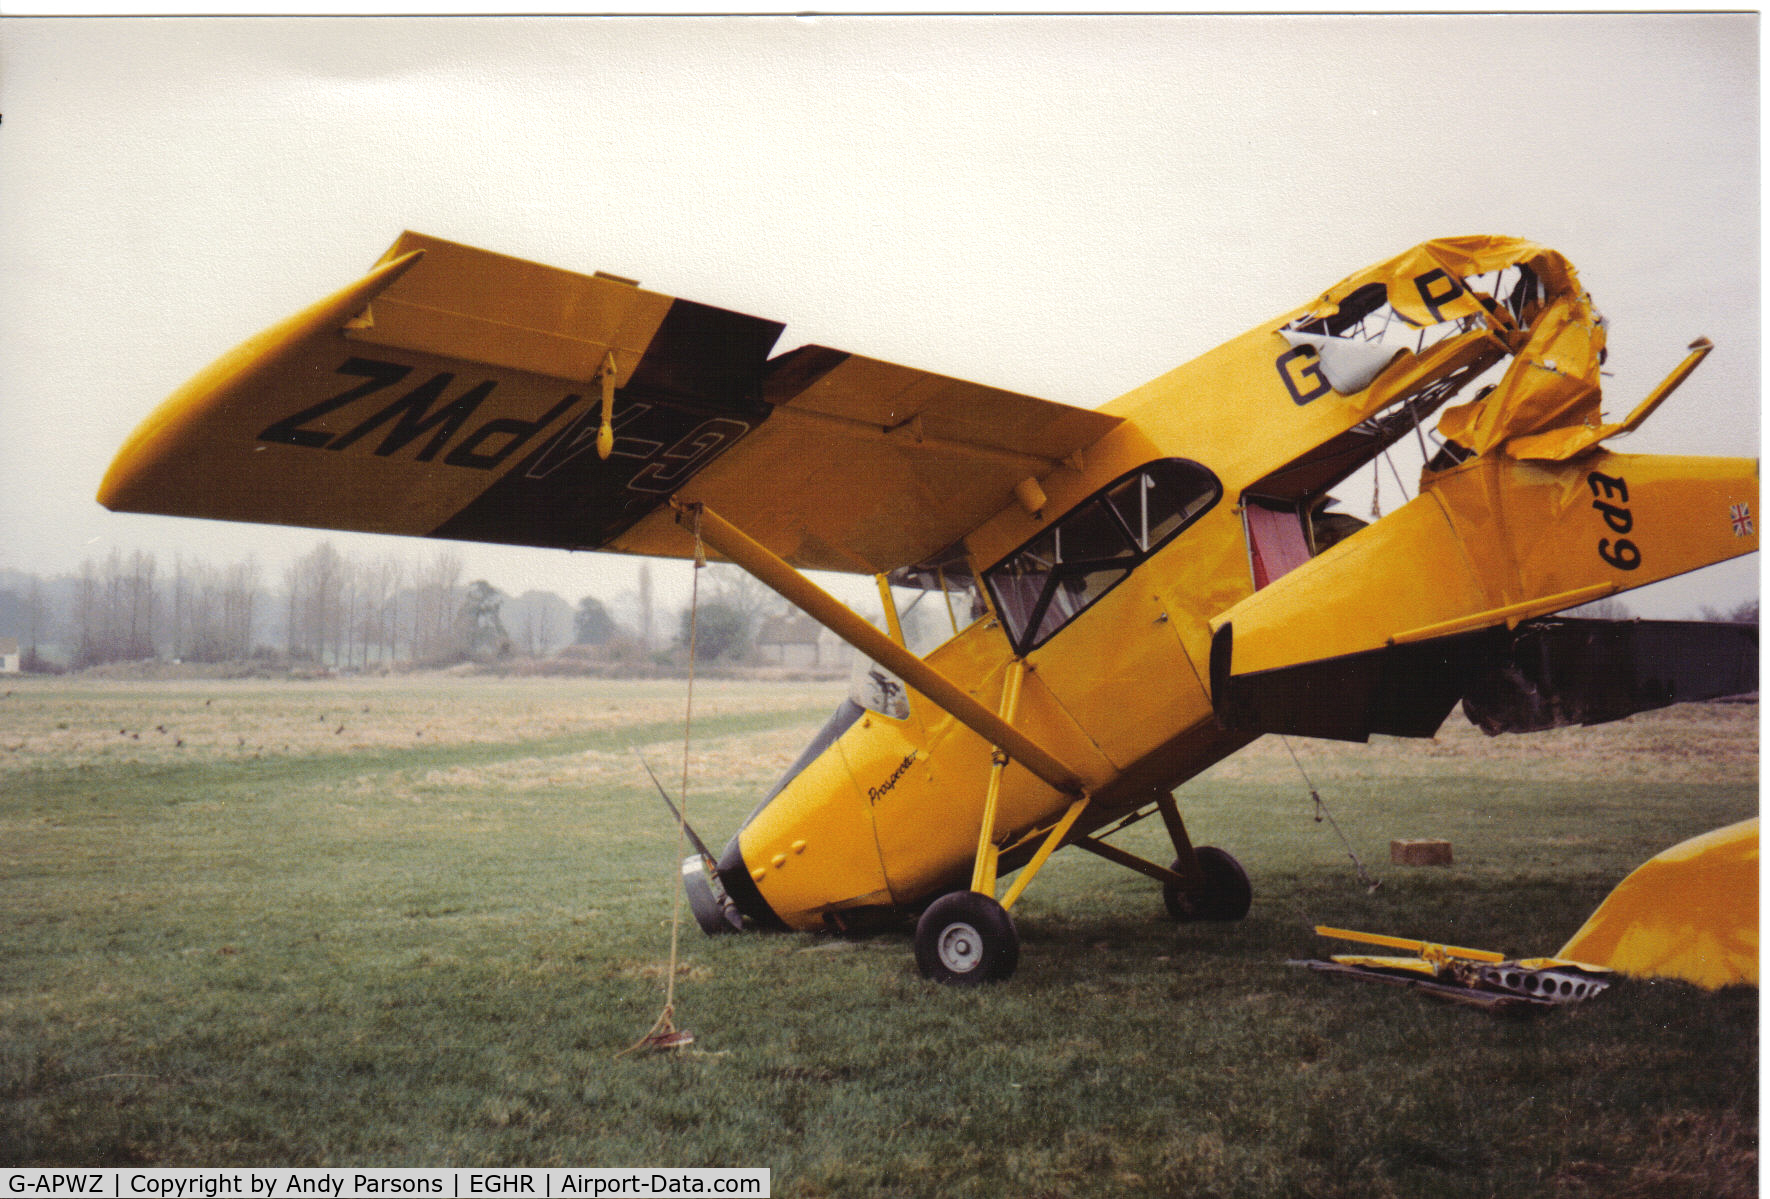 G-APWZ, 1960 Edgar Percival EP-9 Prospector C/N 42, Result of a storm at Goodwood